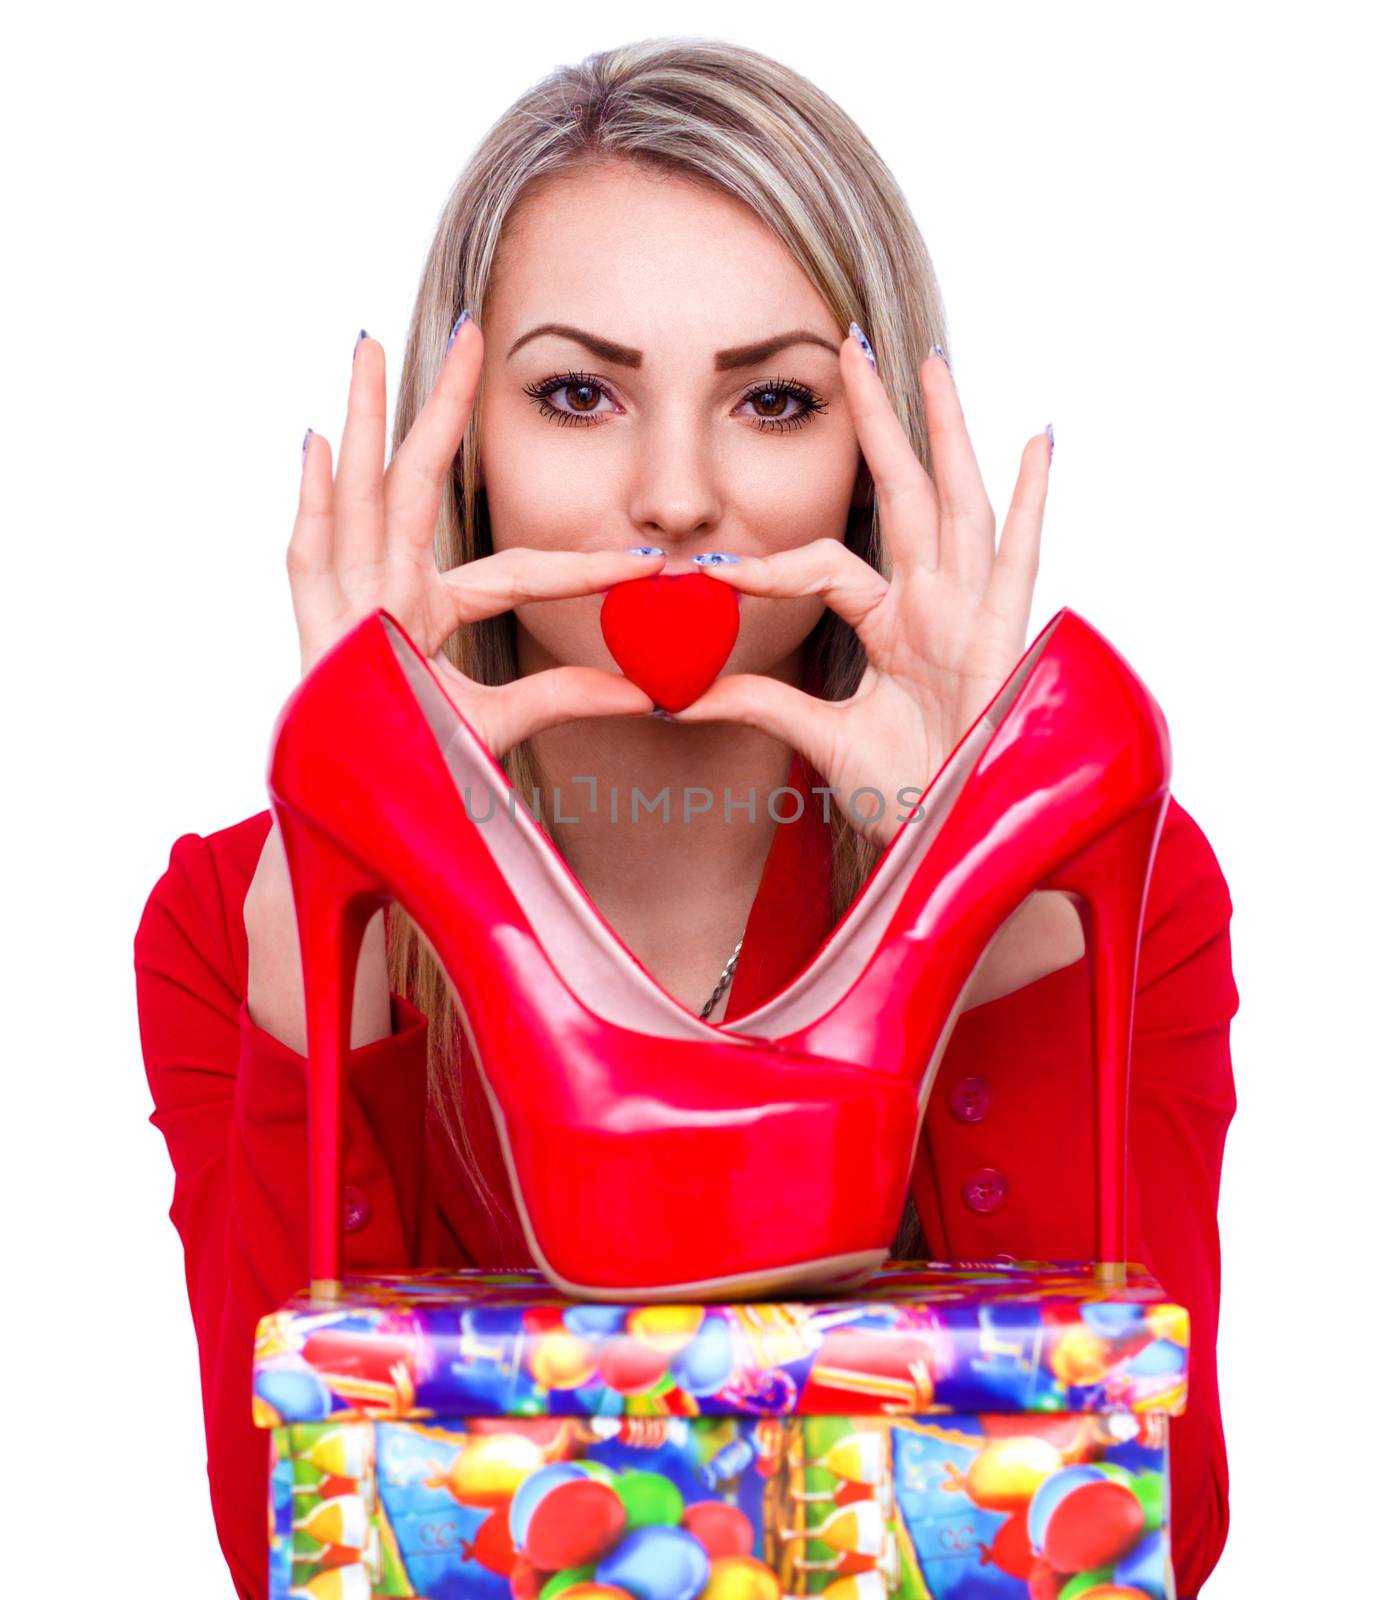 Young beautiful woman happy to receive red high heels shoes as a present, isolated on white
